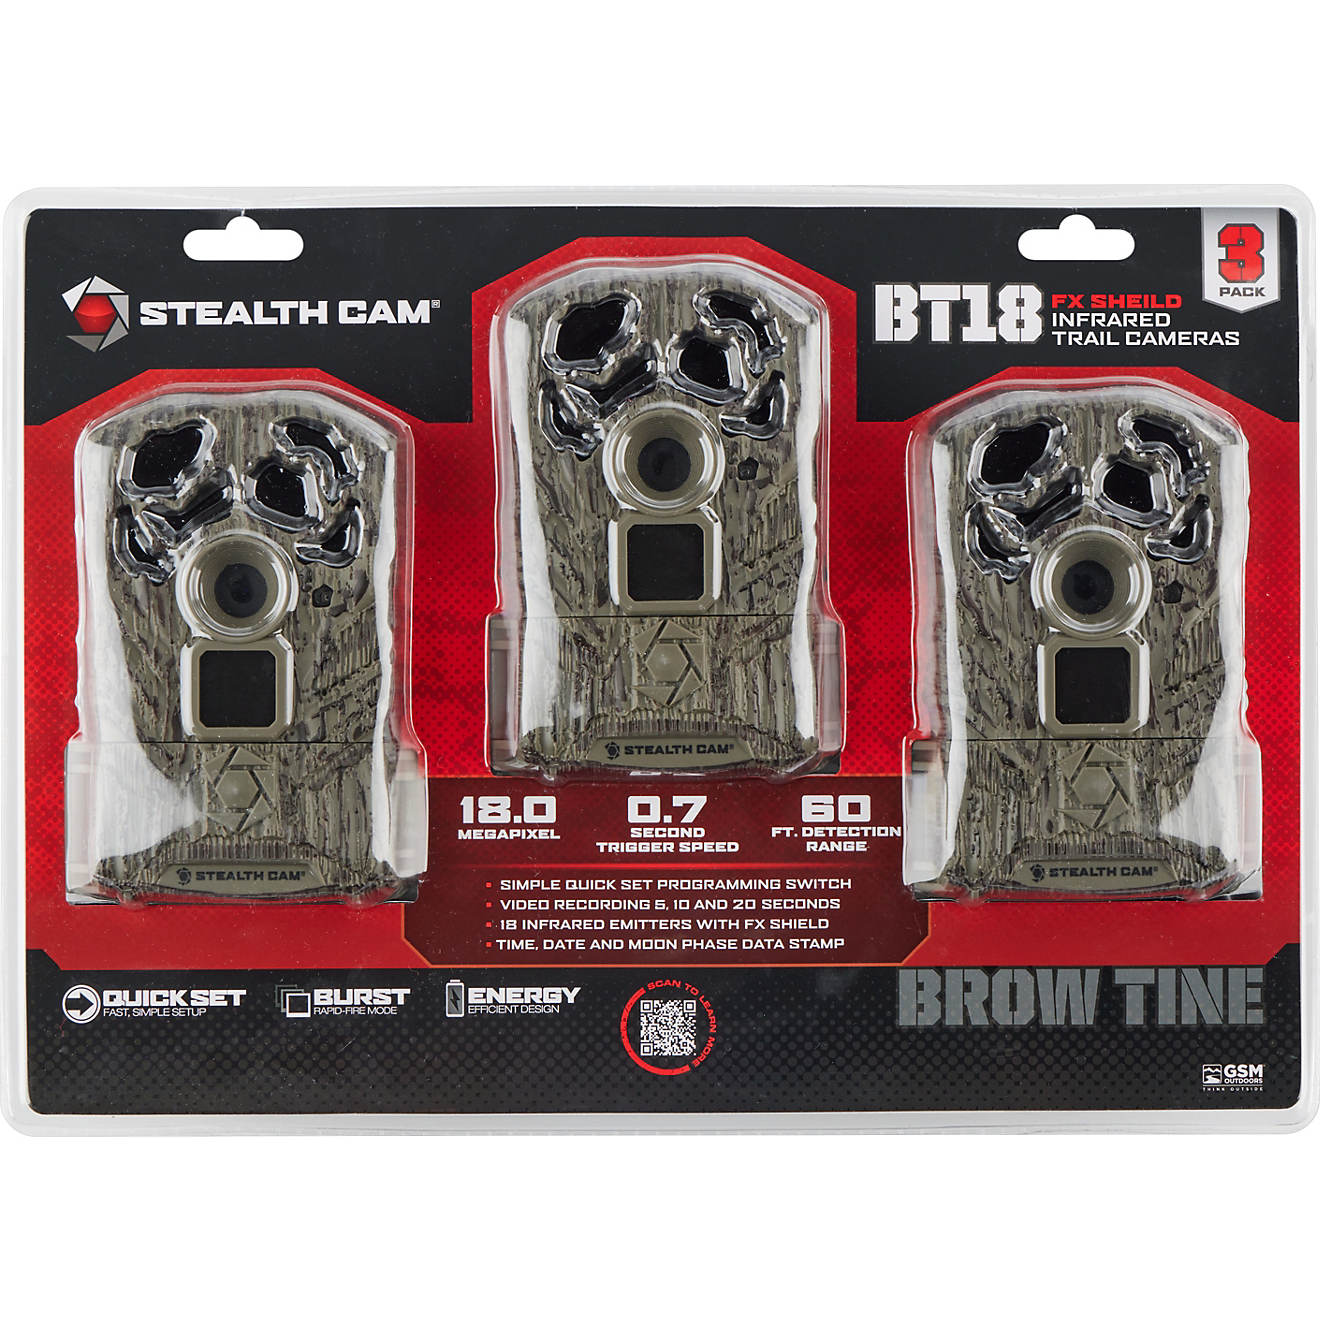 Stealth Cam Browtine 18 MP 3-Pack Trail Camera                                                                                   - view number 1